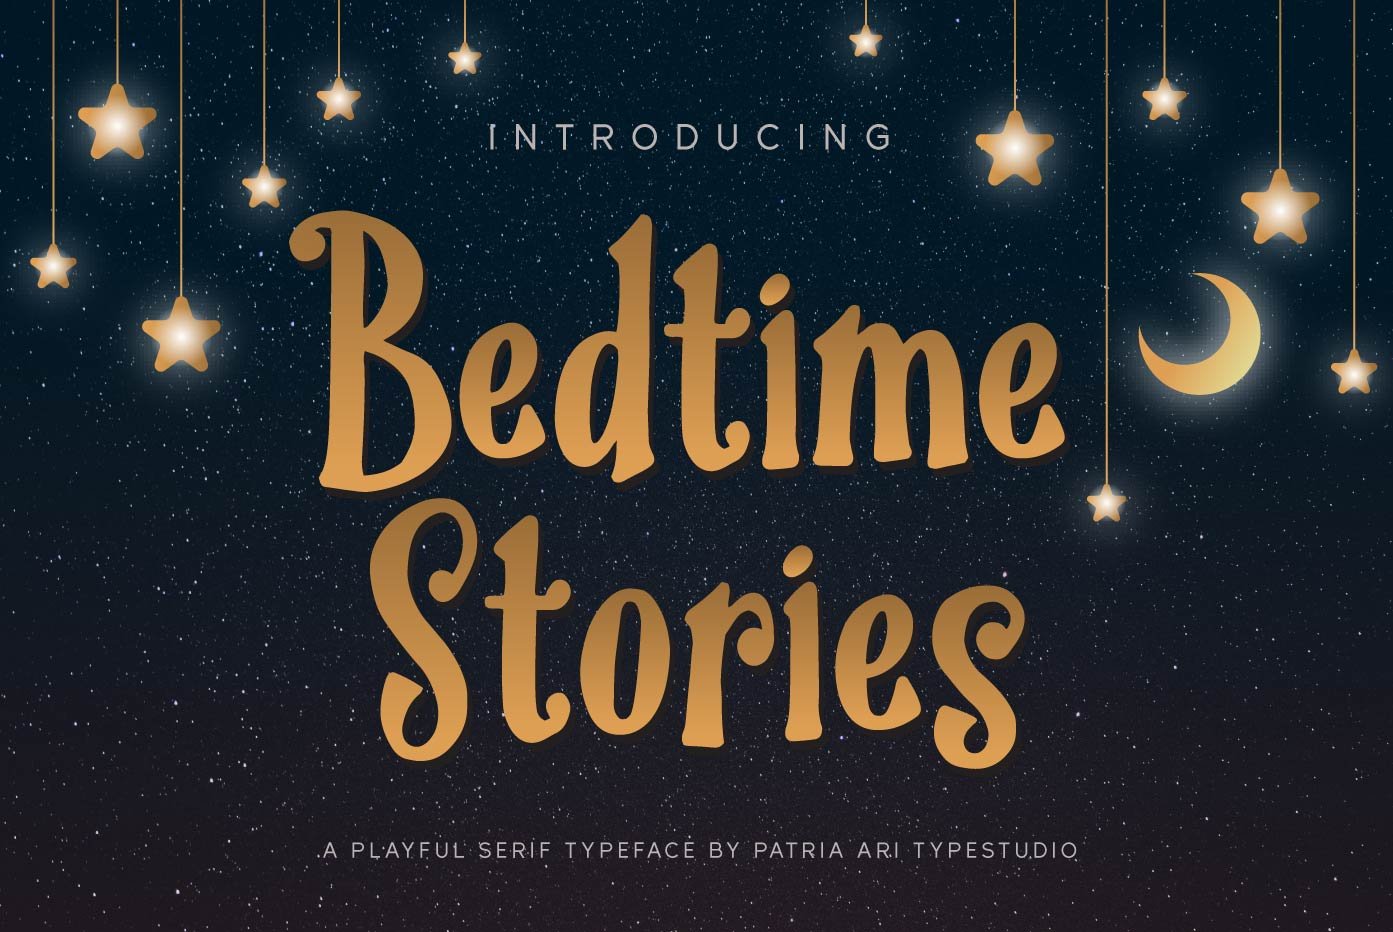 Bedtime Stories - Cute Kids Font cover image.